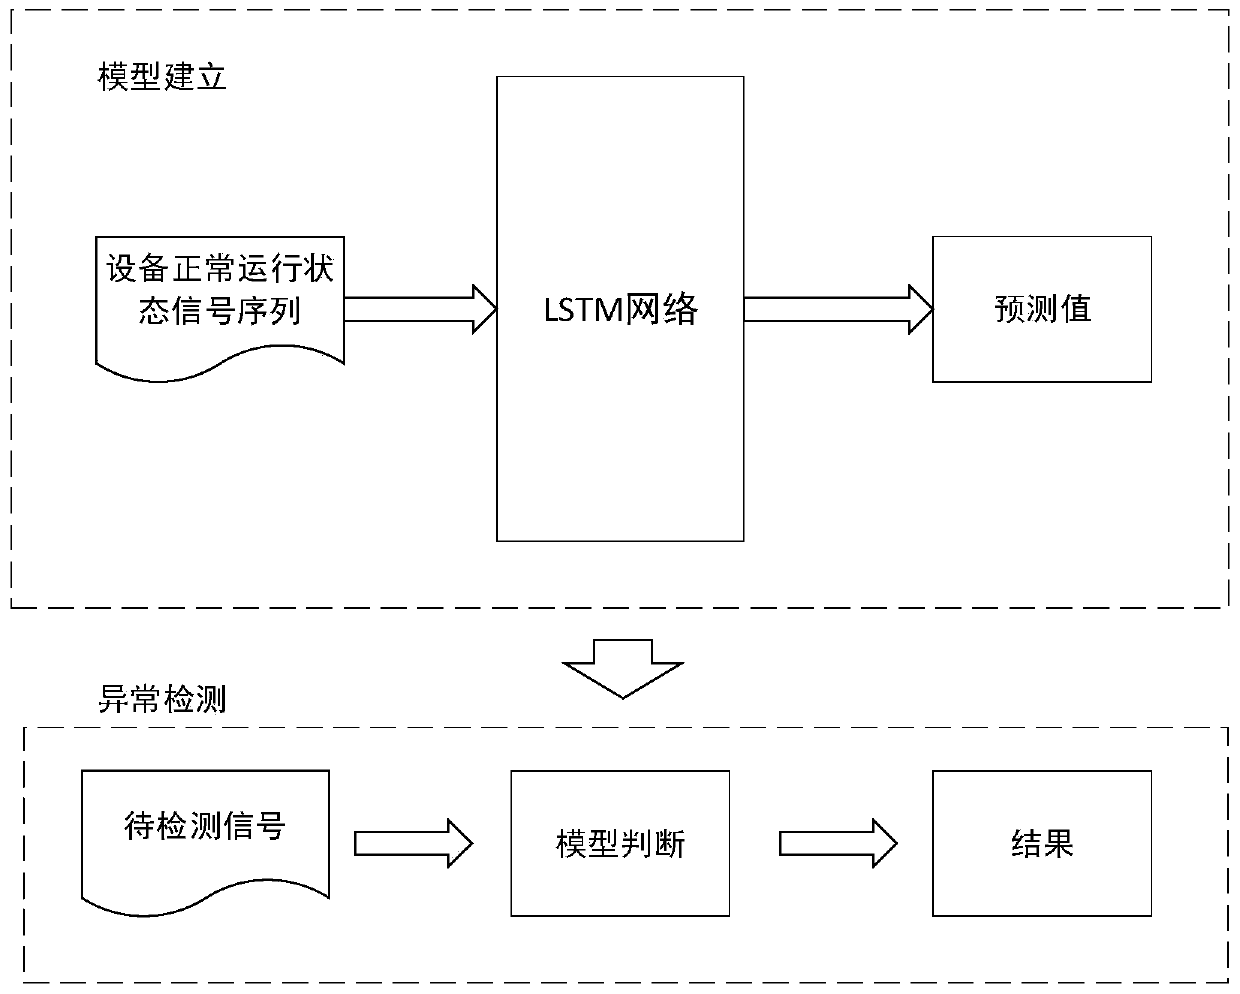 Power grid embedded terminal safety monitoring method and system based on side channel